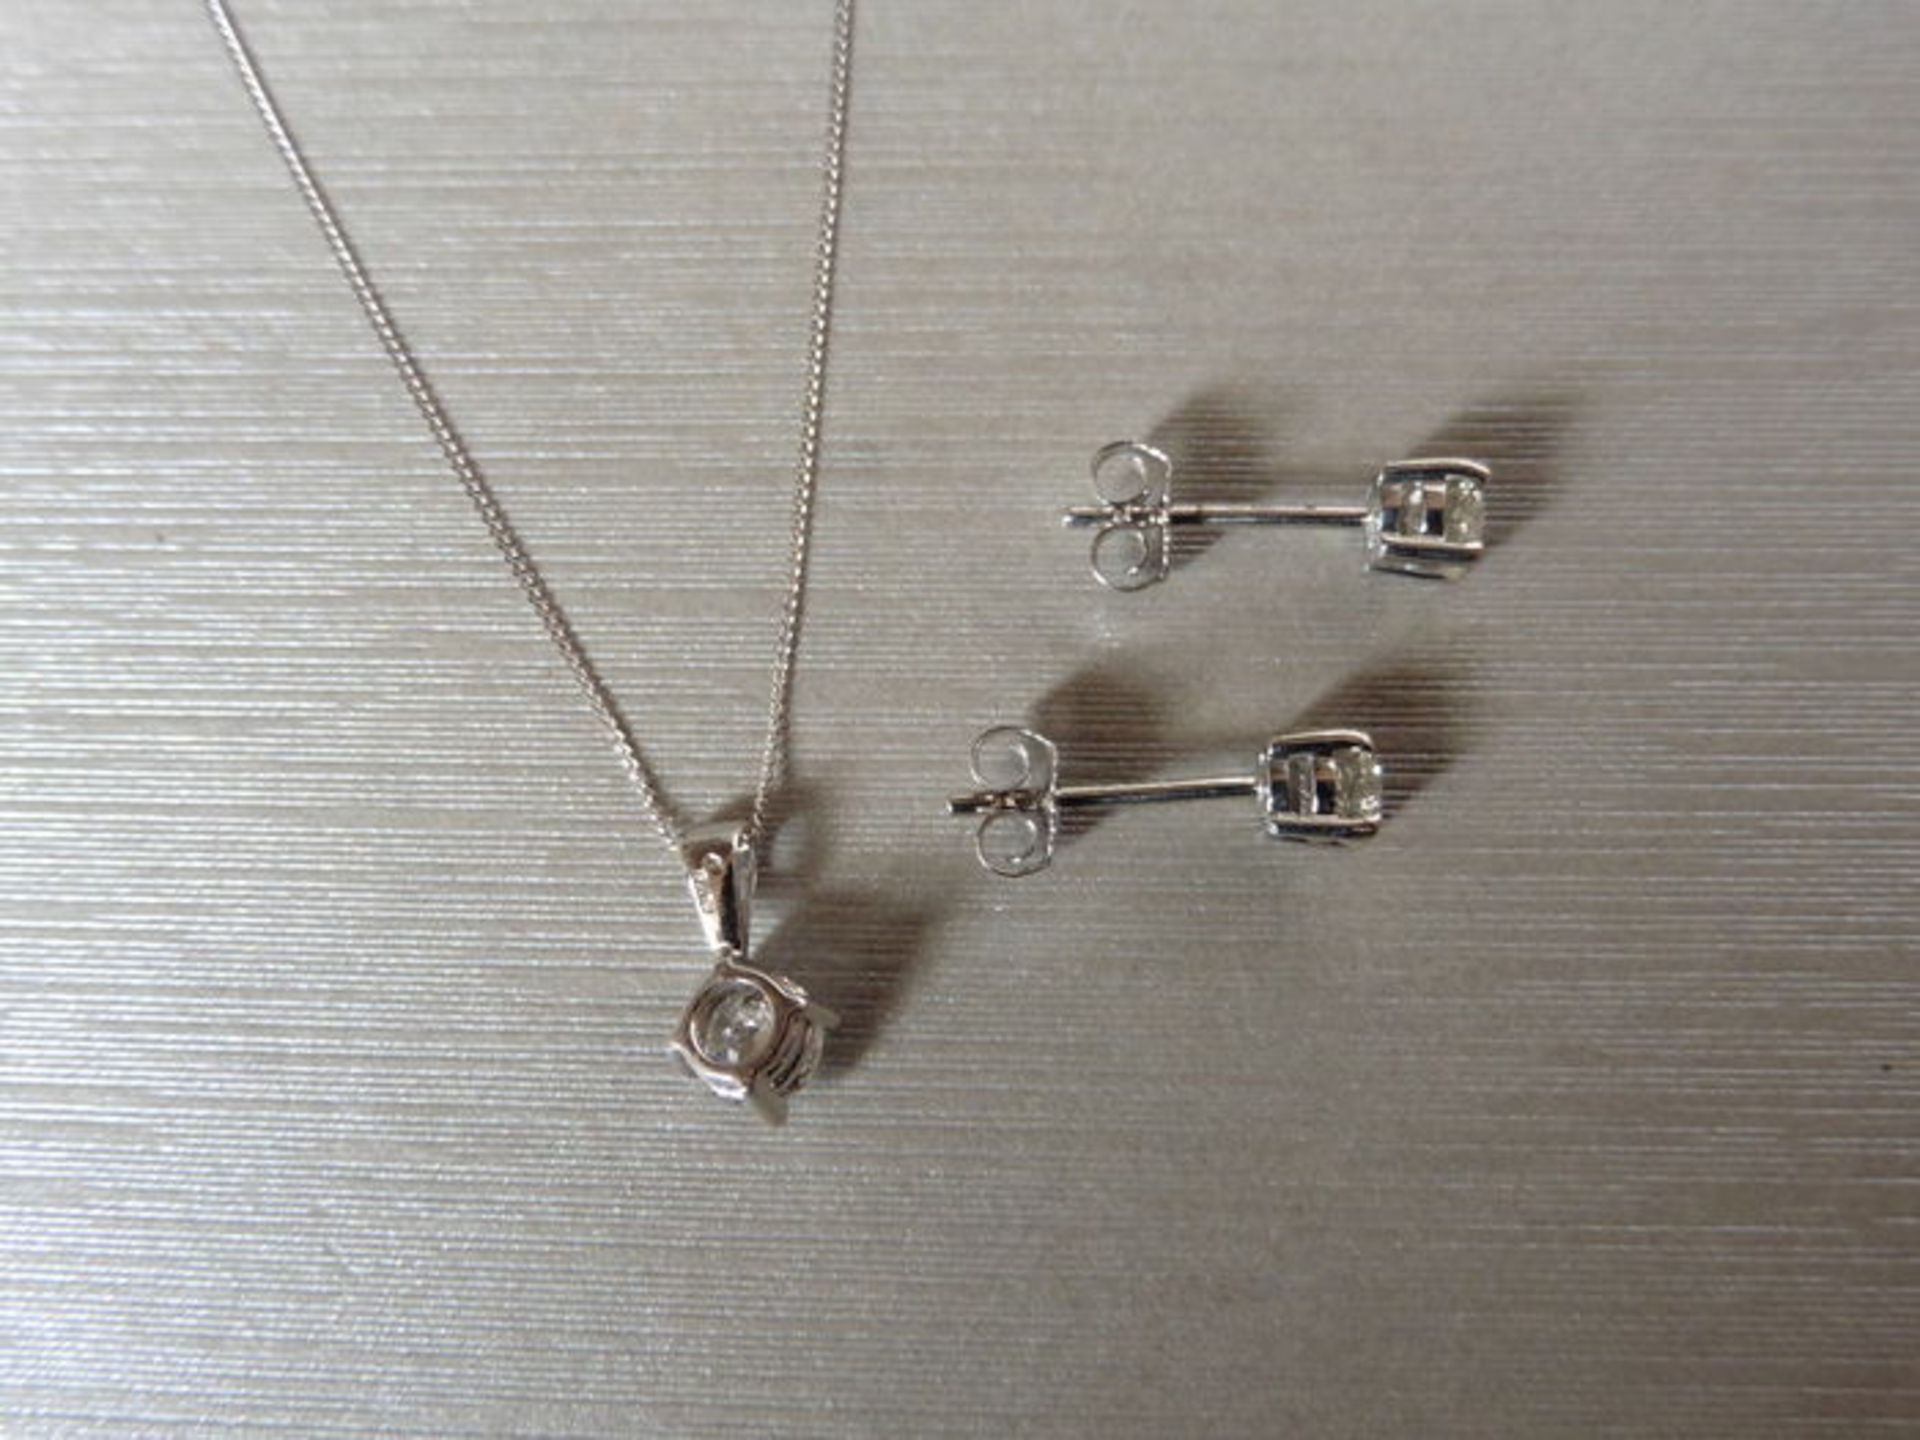 0.25ct / 0.50ct platinum set. Pendant set with a 0.25ct diamond with a 9ct wg chain. Pair of stud - Image 2 of 2